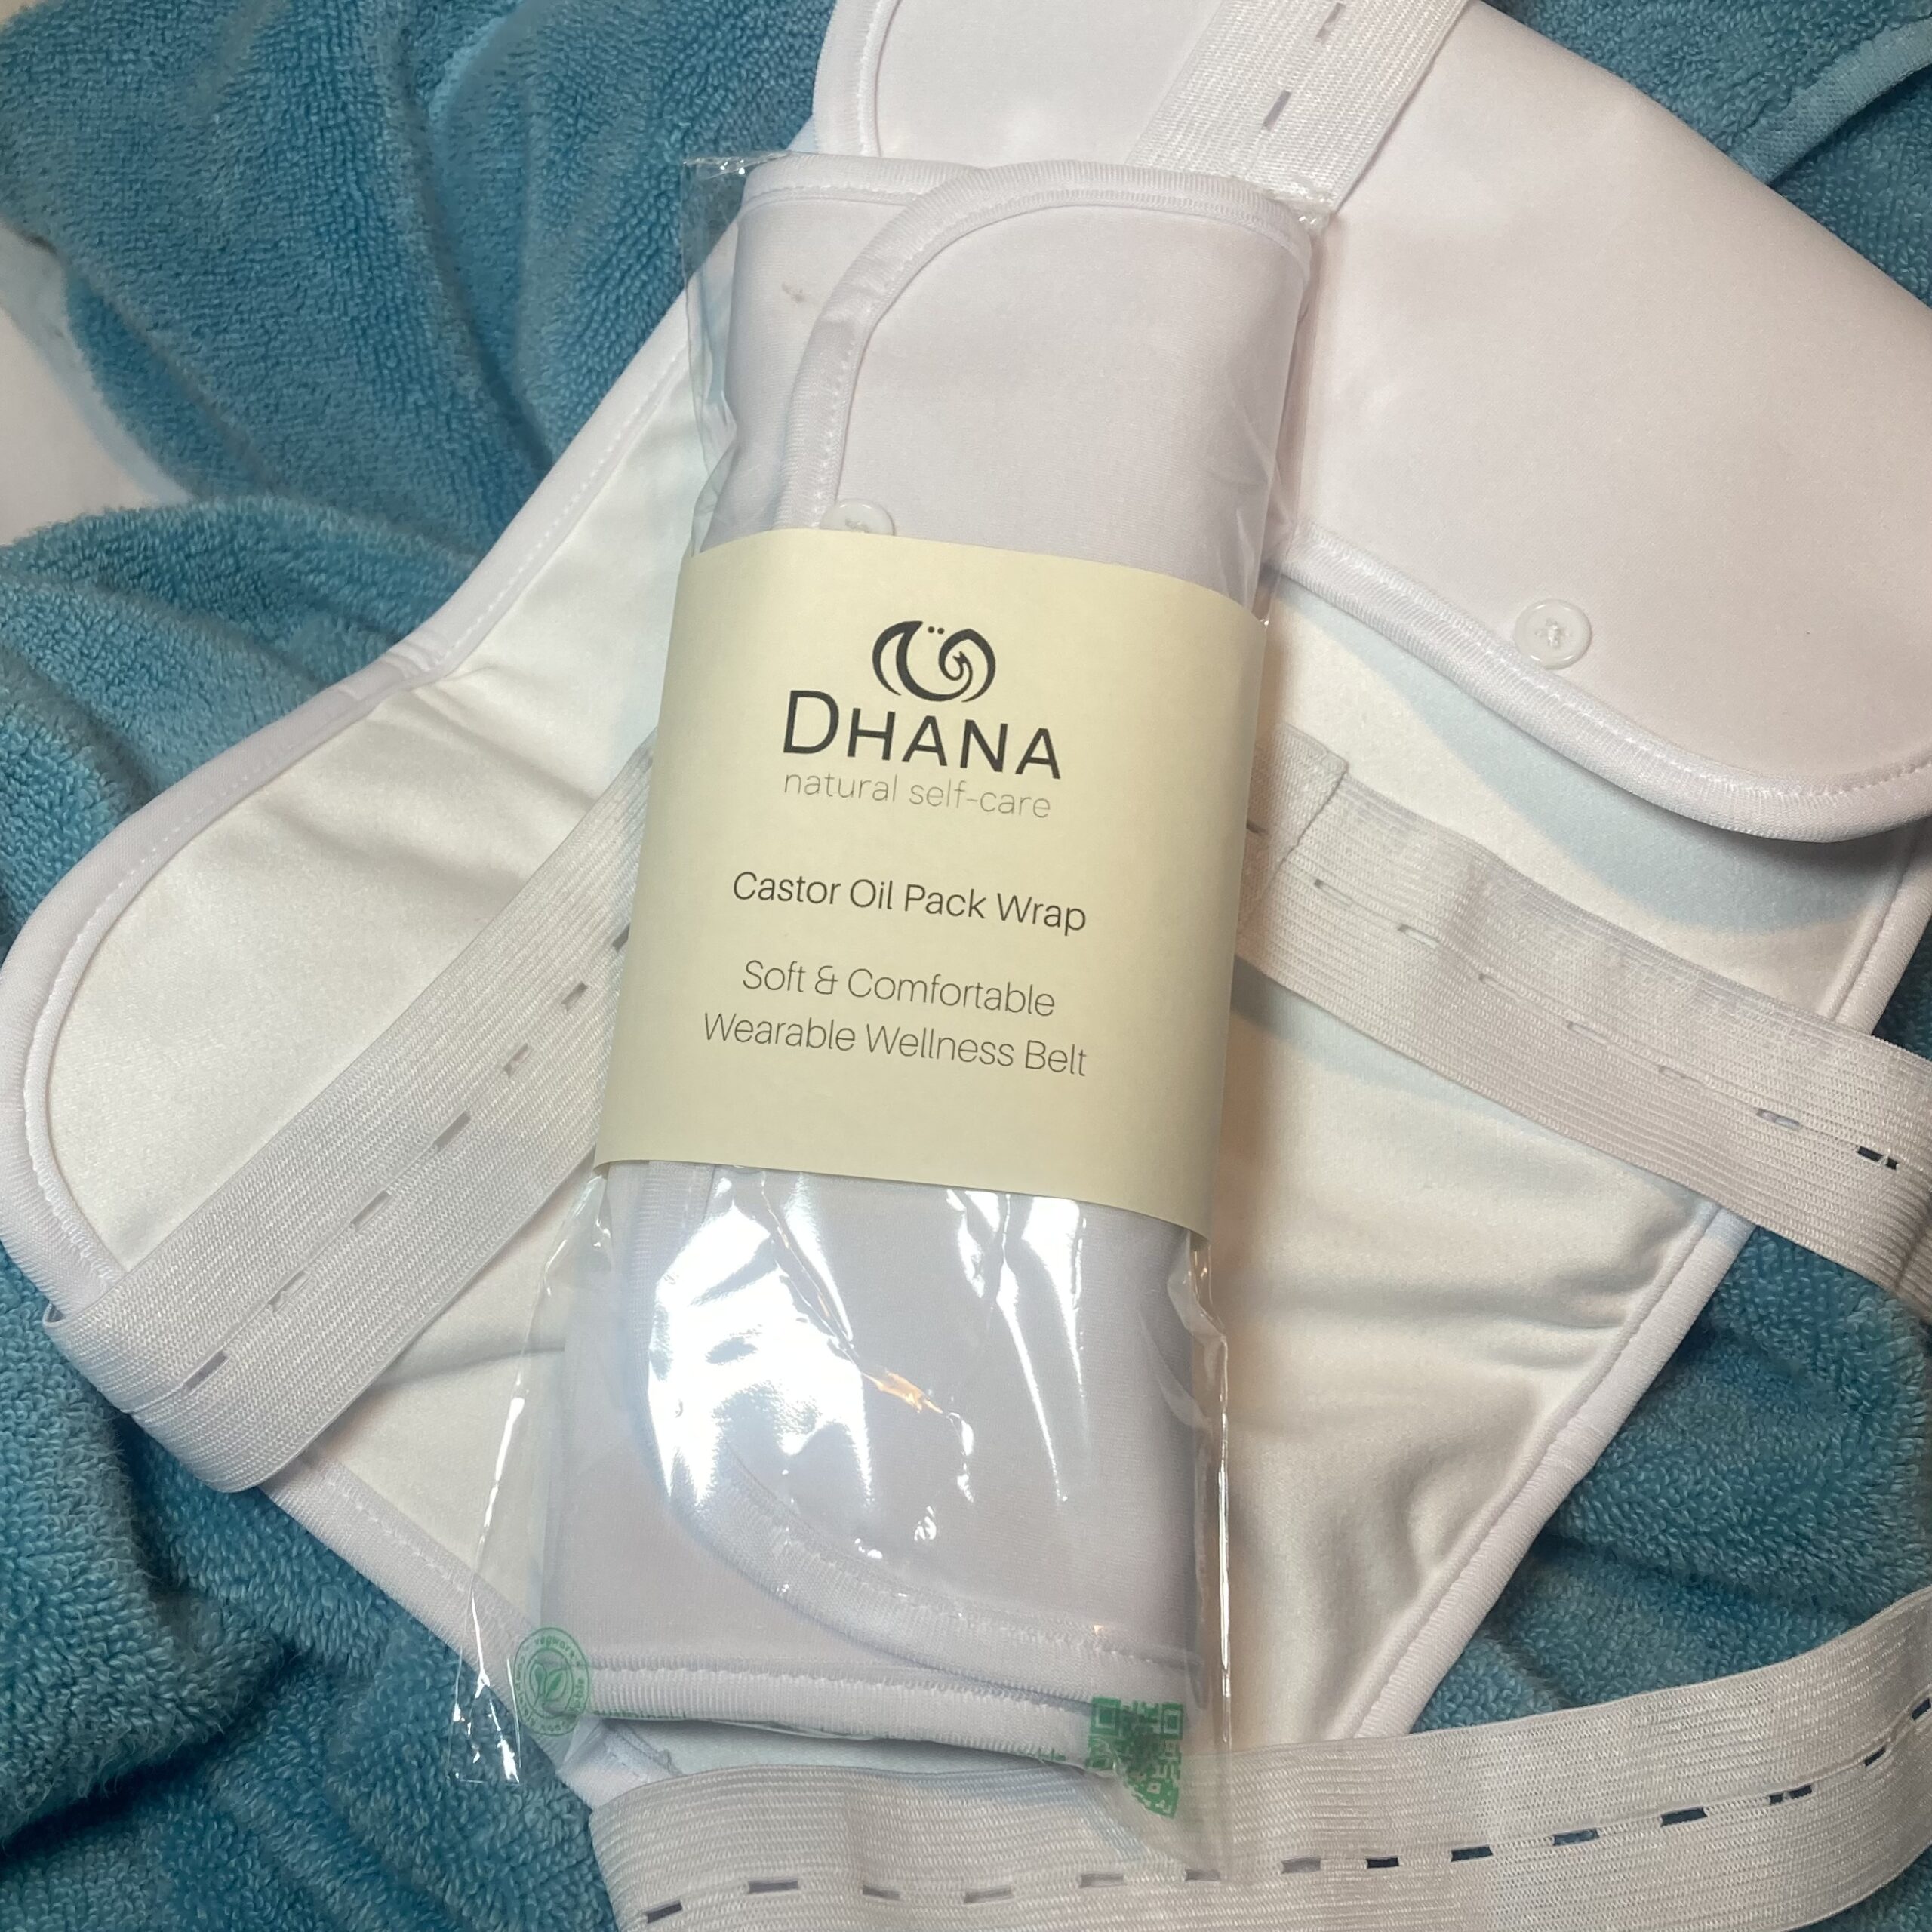 Dhana Self-Care Castor Oil Wrap in package on top of one laid out on a turquoise towel